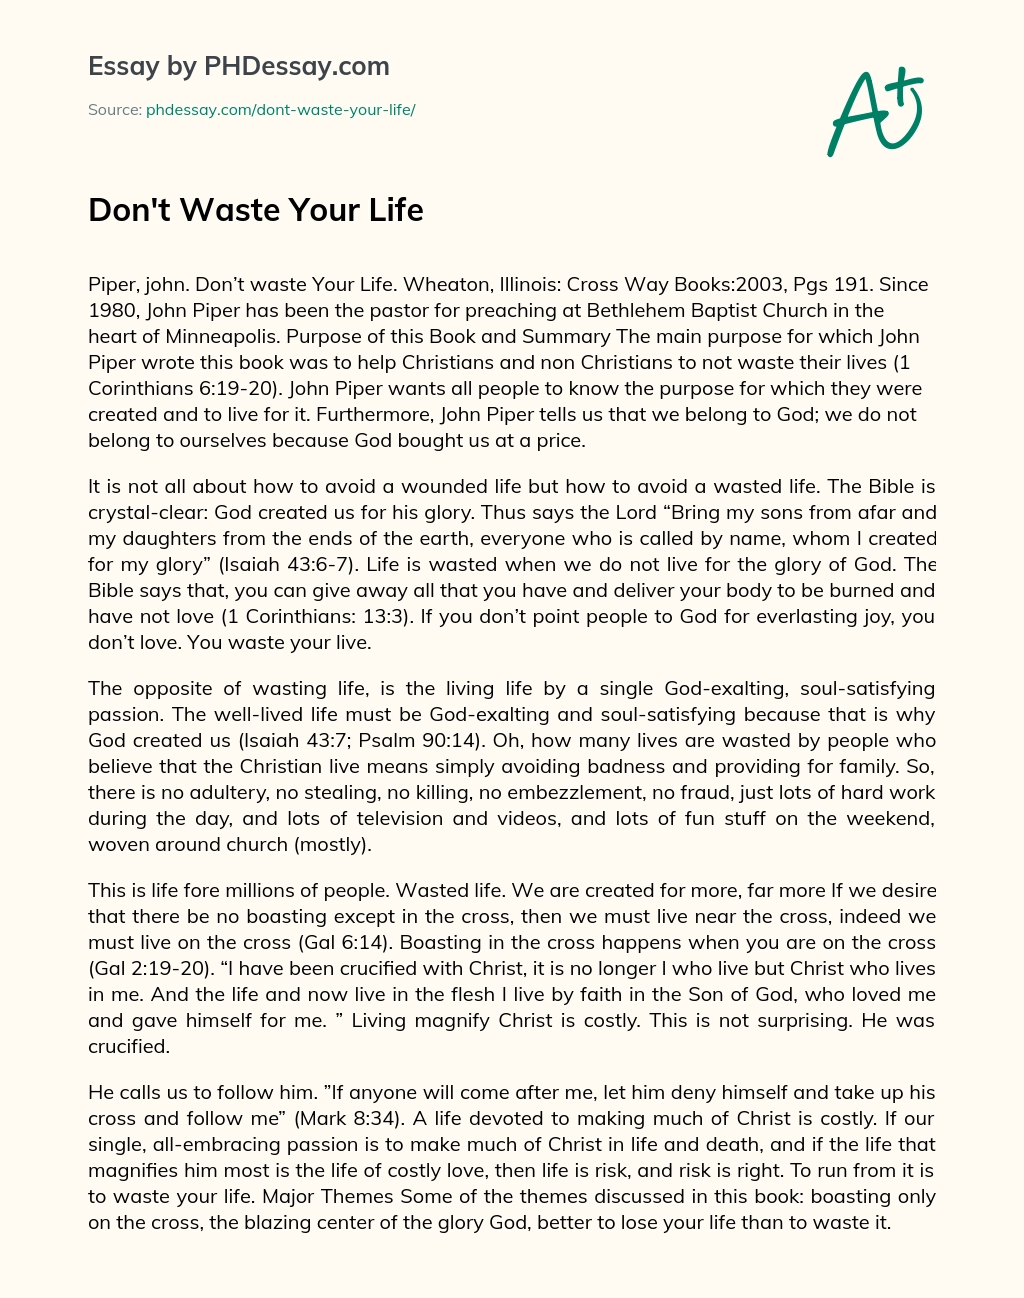 Don’t Waste Your Life essay